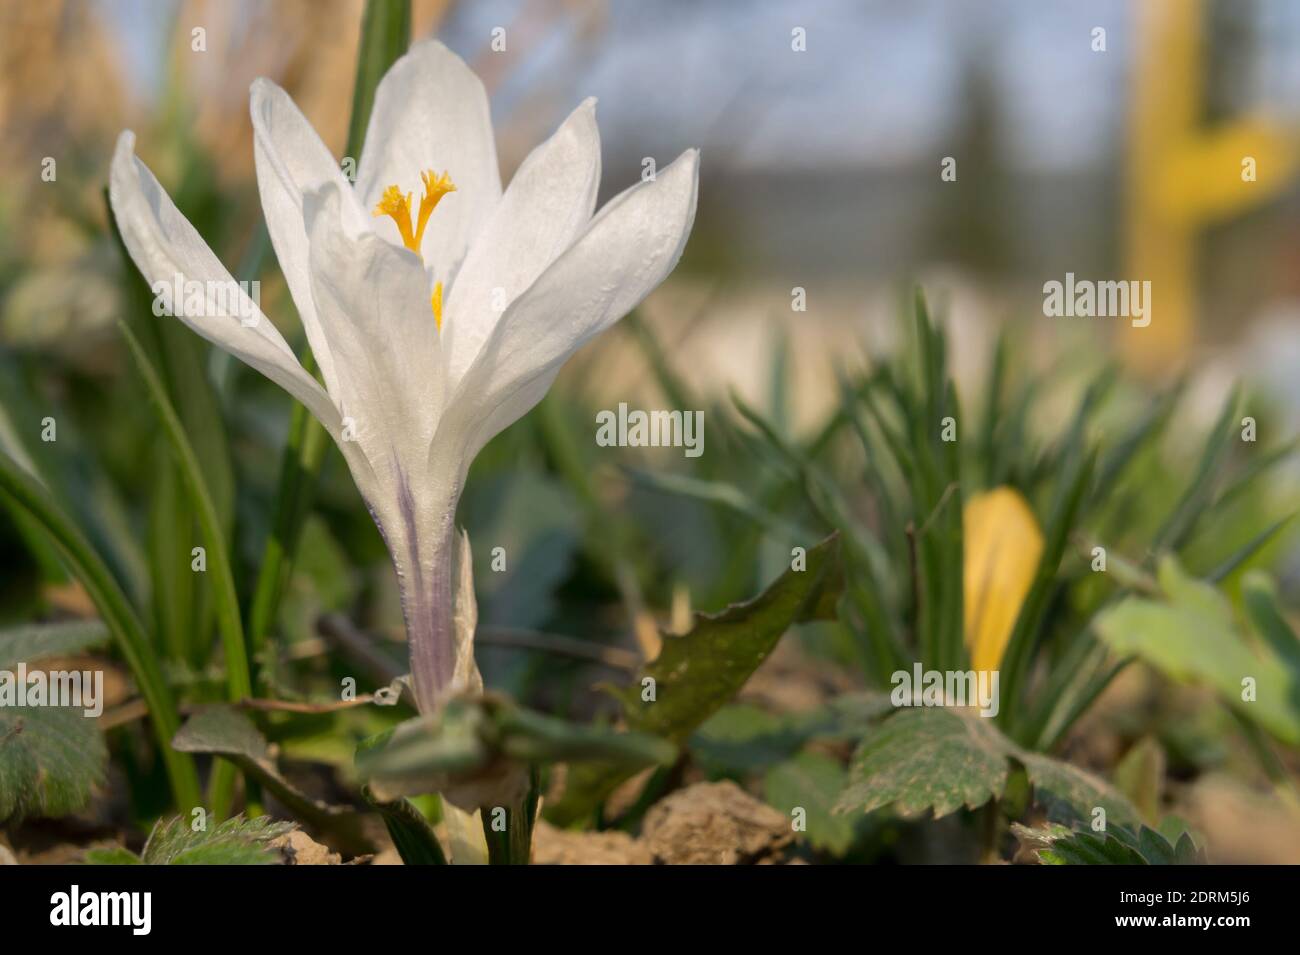 The white flower of Saffron (Latin Crocus) is a bulbous ornamental plant that grows among the grass in the garden. Stock Photo